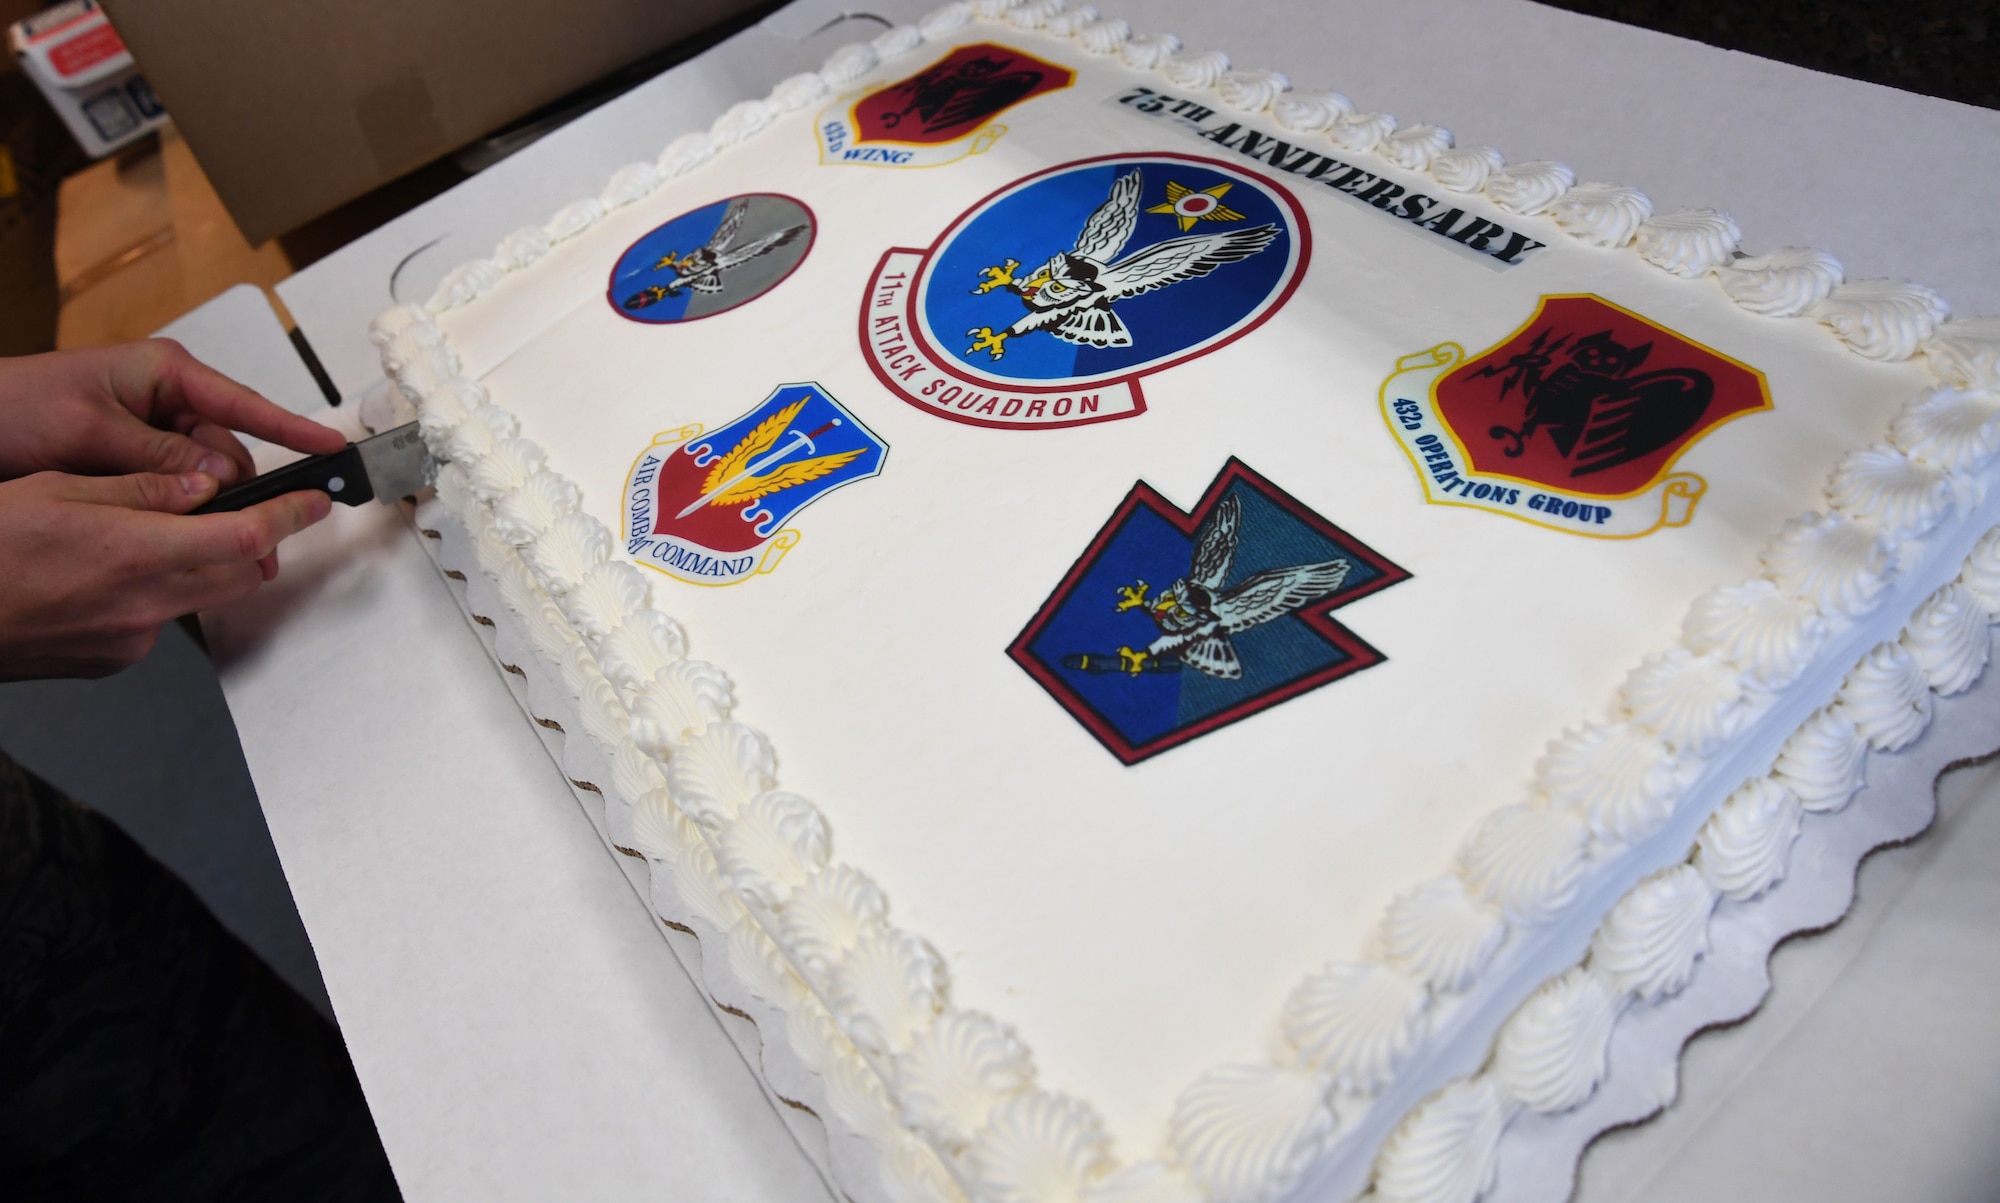 An Airman with the 11th Attack Squadron cuts into a cake March 3, 2017, at Creech Air Force Base, Nev. The 11th ATKS celebrated its 75th anniversary of providing America with key warfighting capabilities such as intelligence, surveillance and reconnaissance. (U.S. Air Force photo/Airman 1st Class James Thompson) 